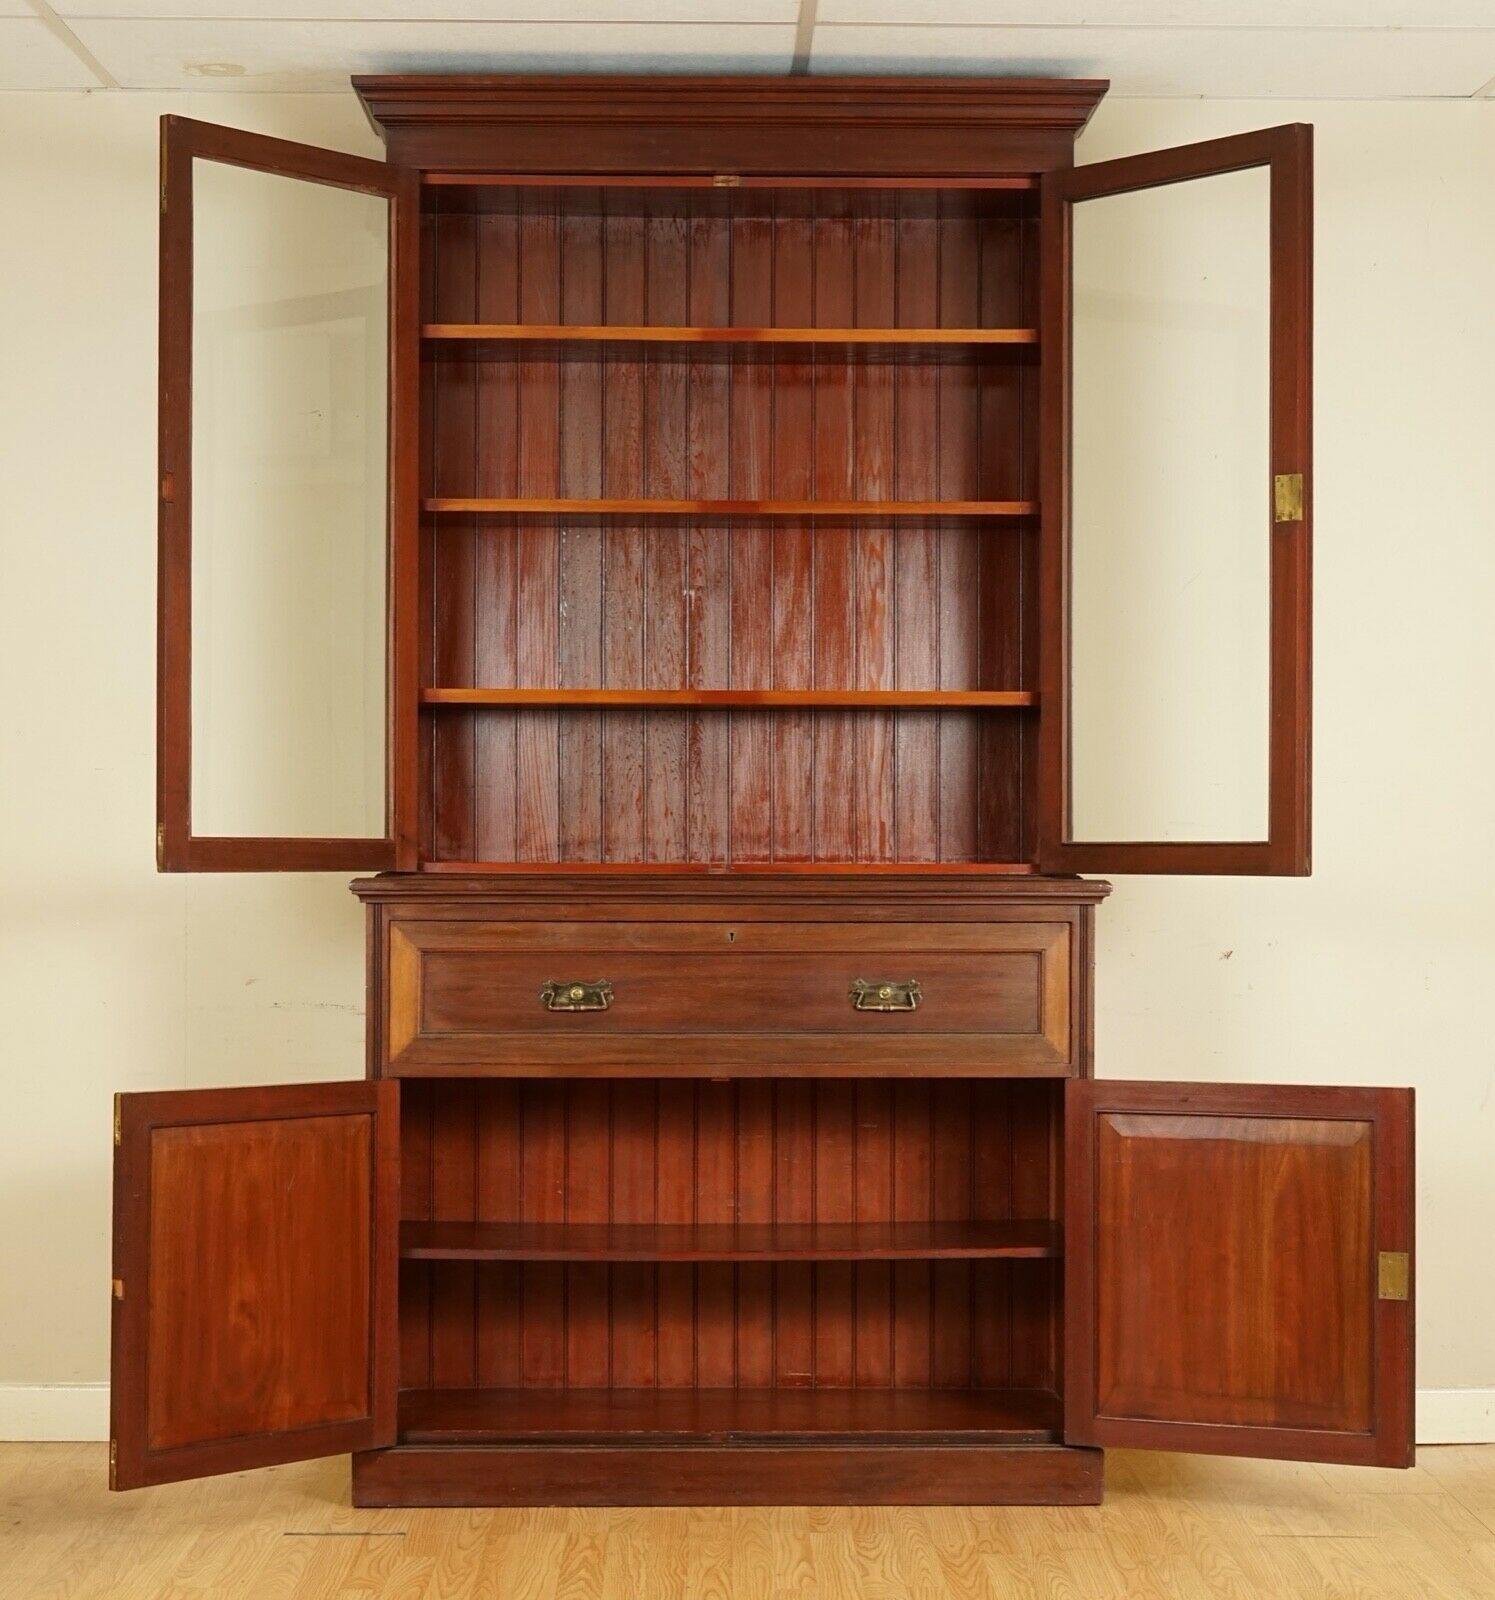 We are delighted to offer for sale this stunning circa 1880 hardwood library bookcase with a secretaries desk.

A well made and collectable library bookcase. The top section has three height-adjustable shelves so four sections in total. The middle